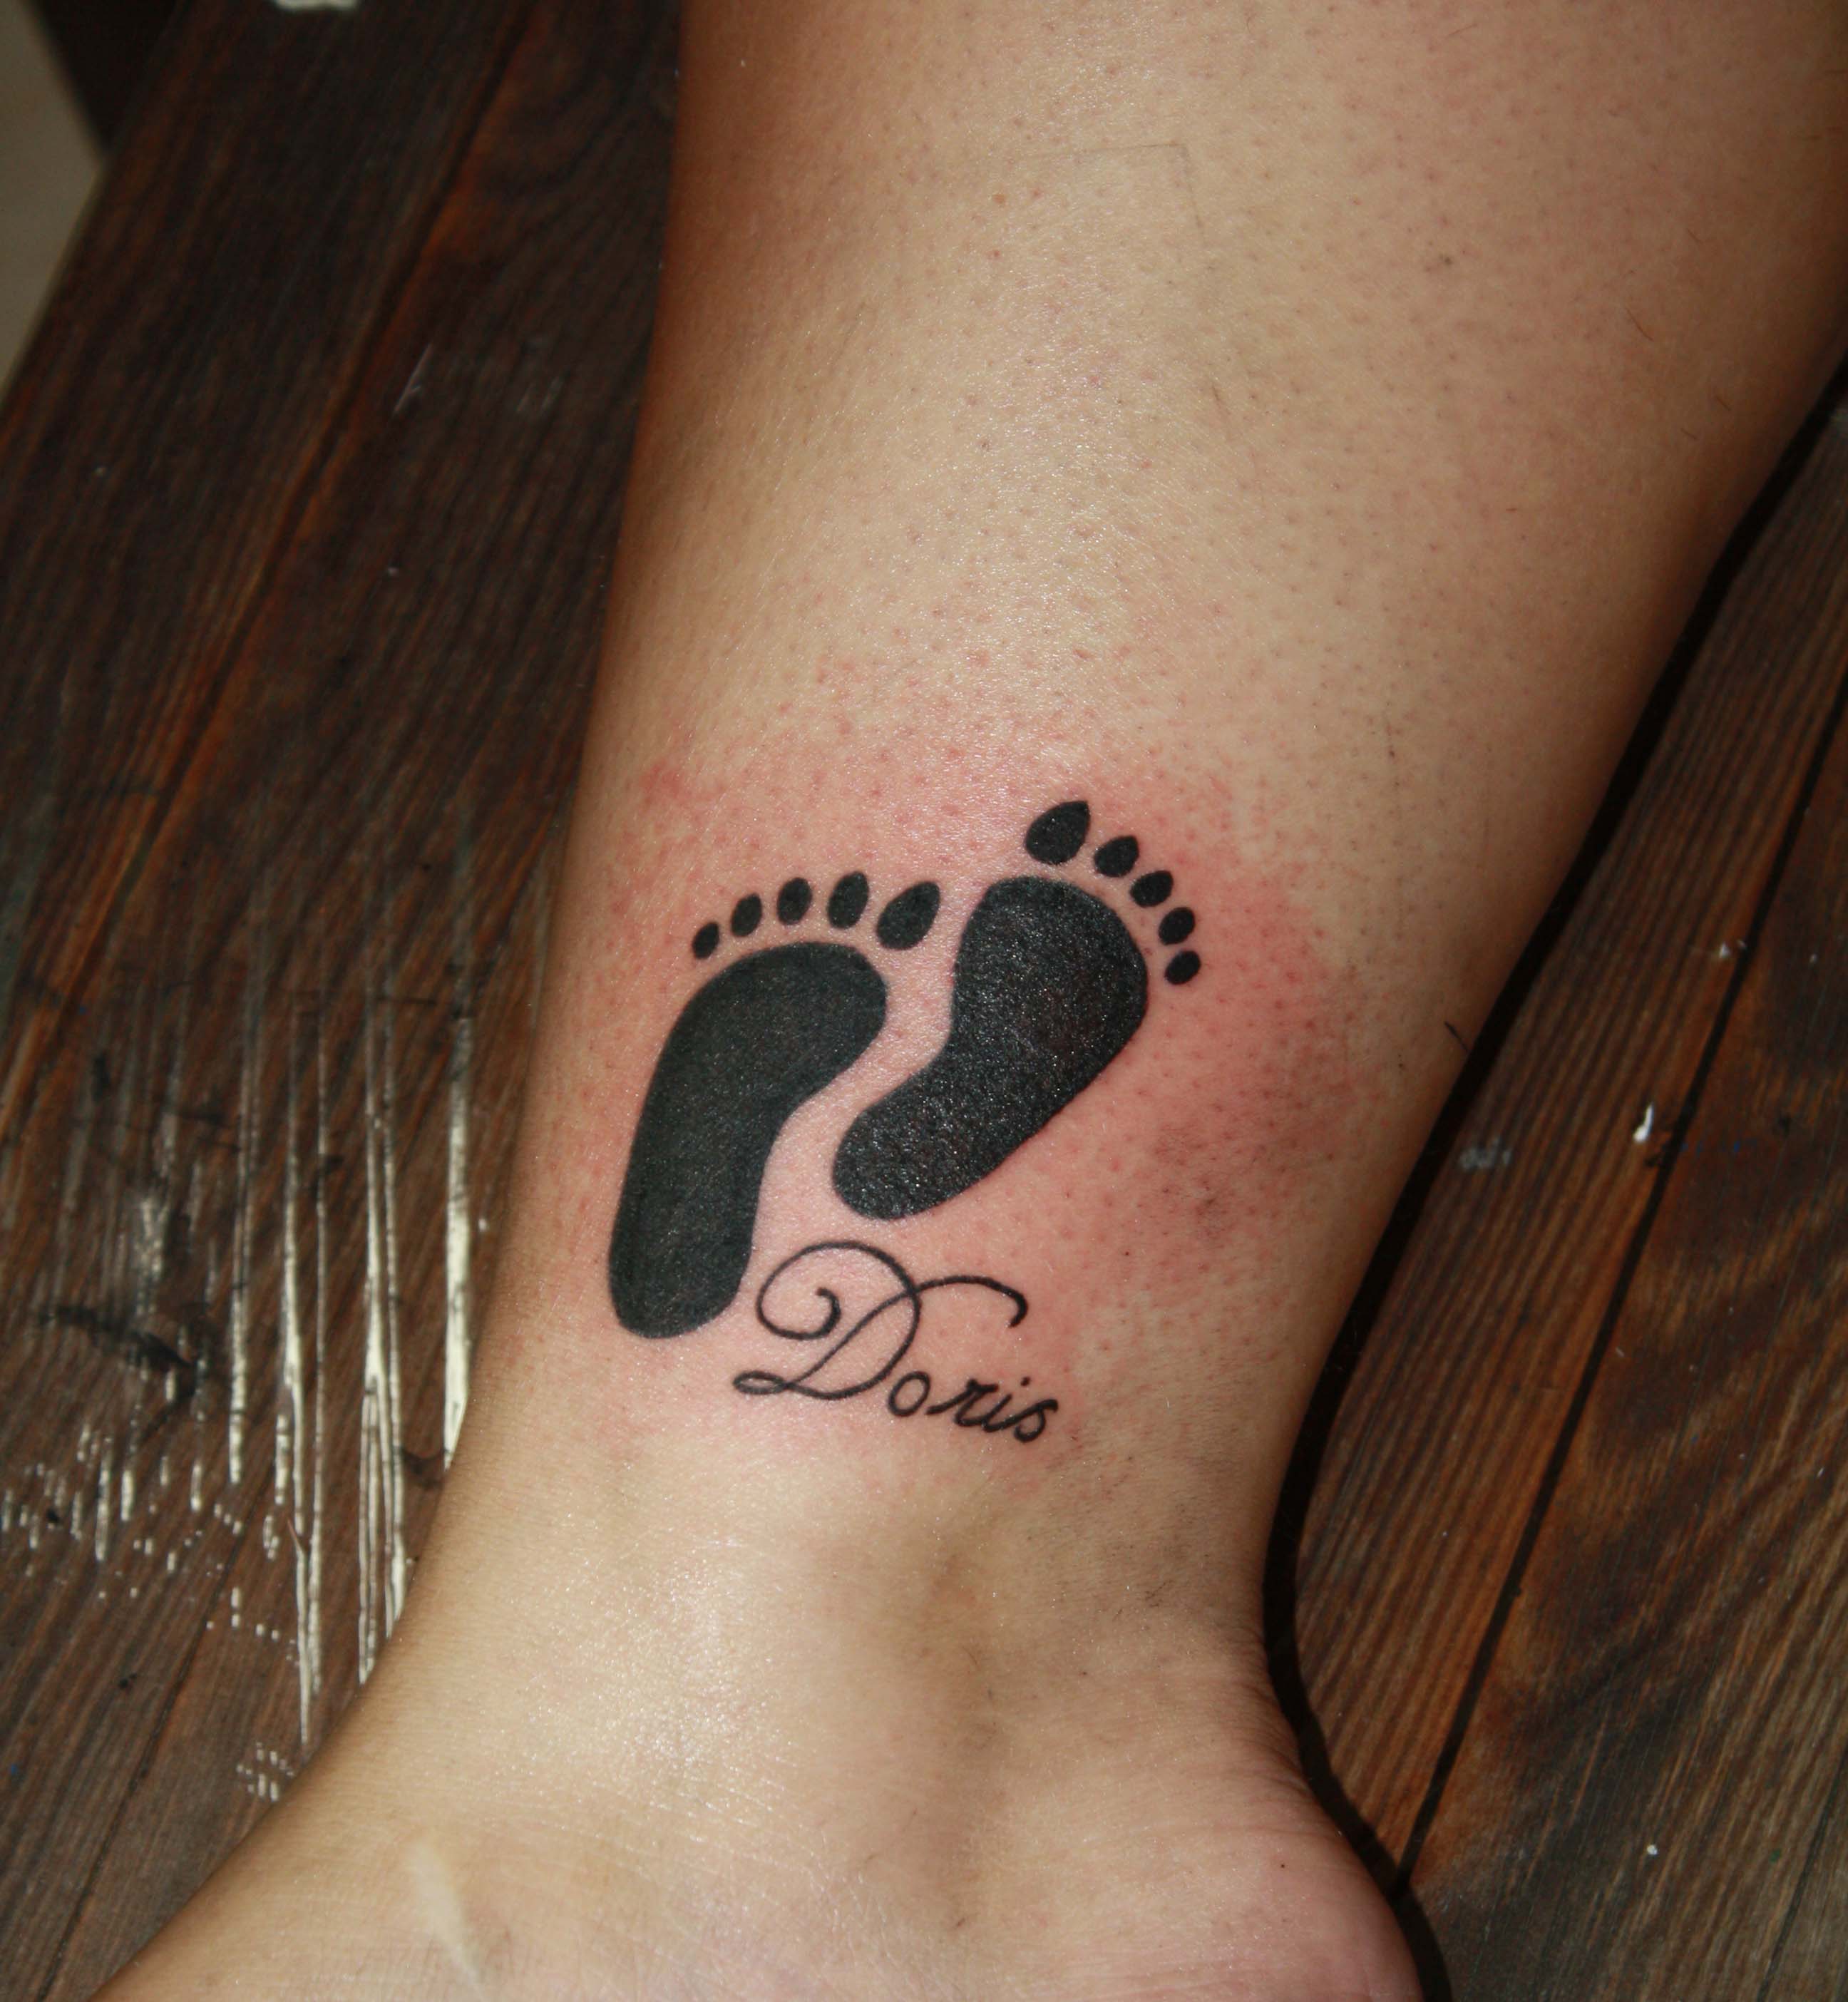 Baby Name Tattoo Design Idea on Ankle